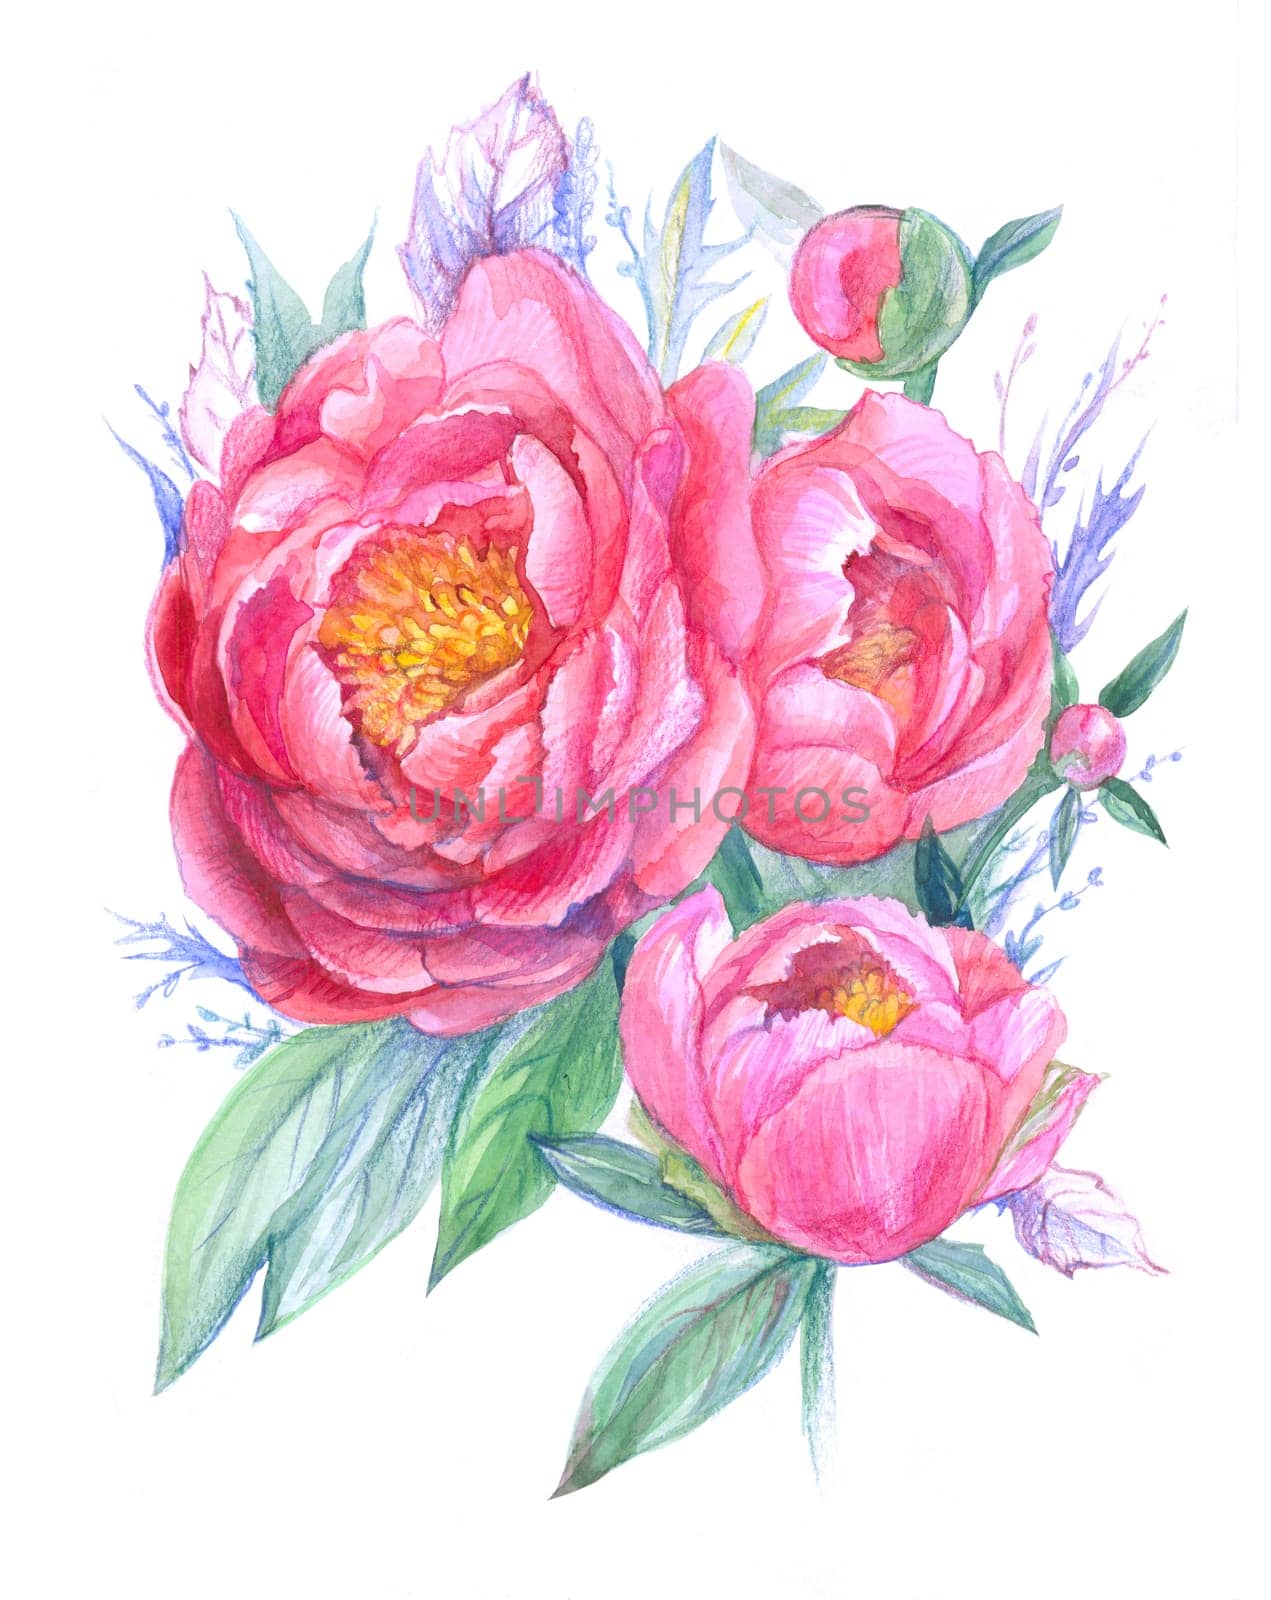 watercolor painting with bouquet of bright pink peonies by MarinaVoyush